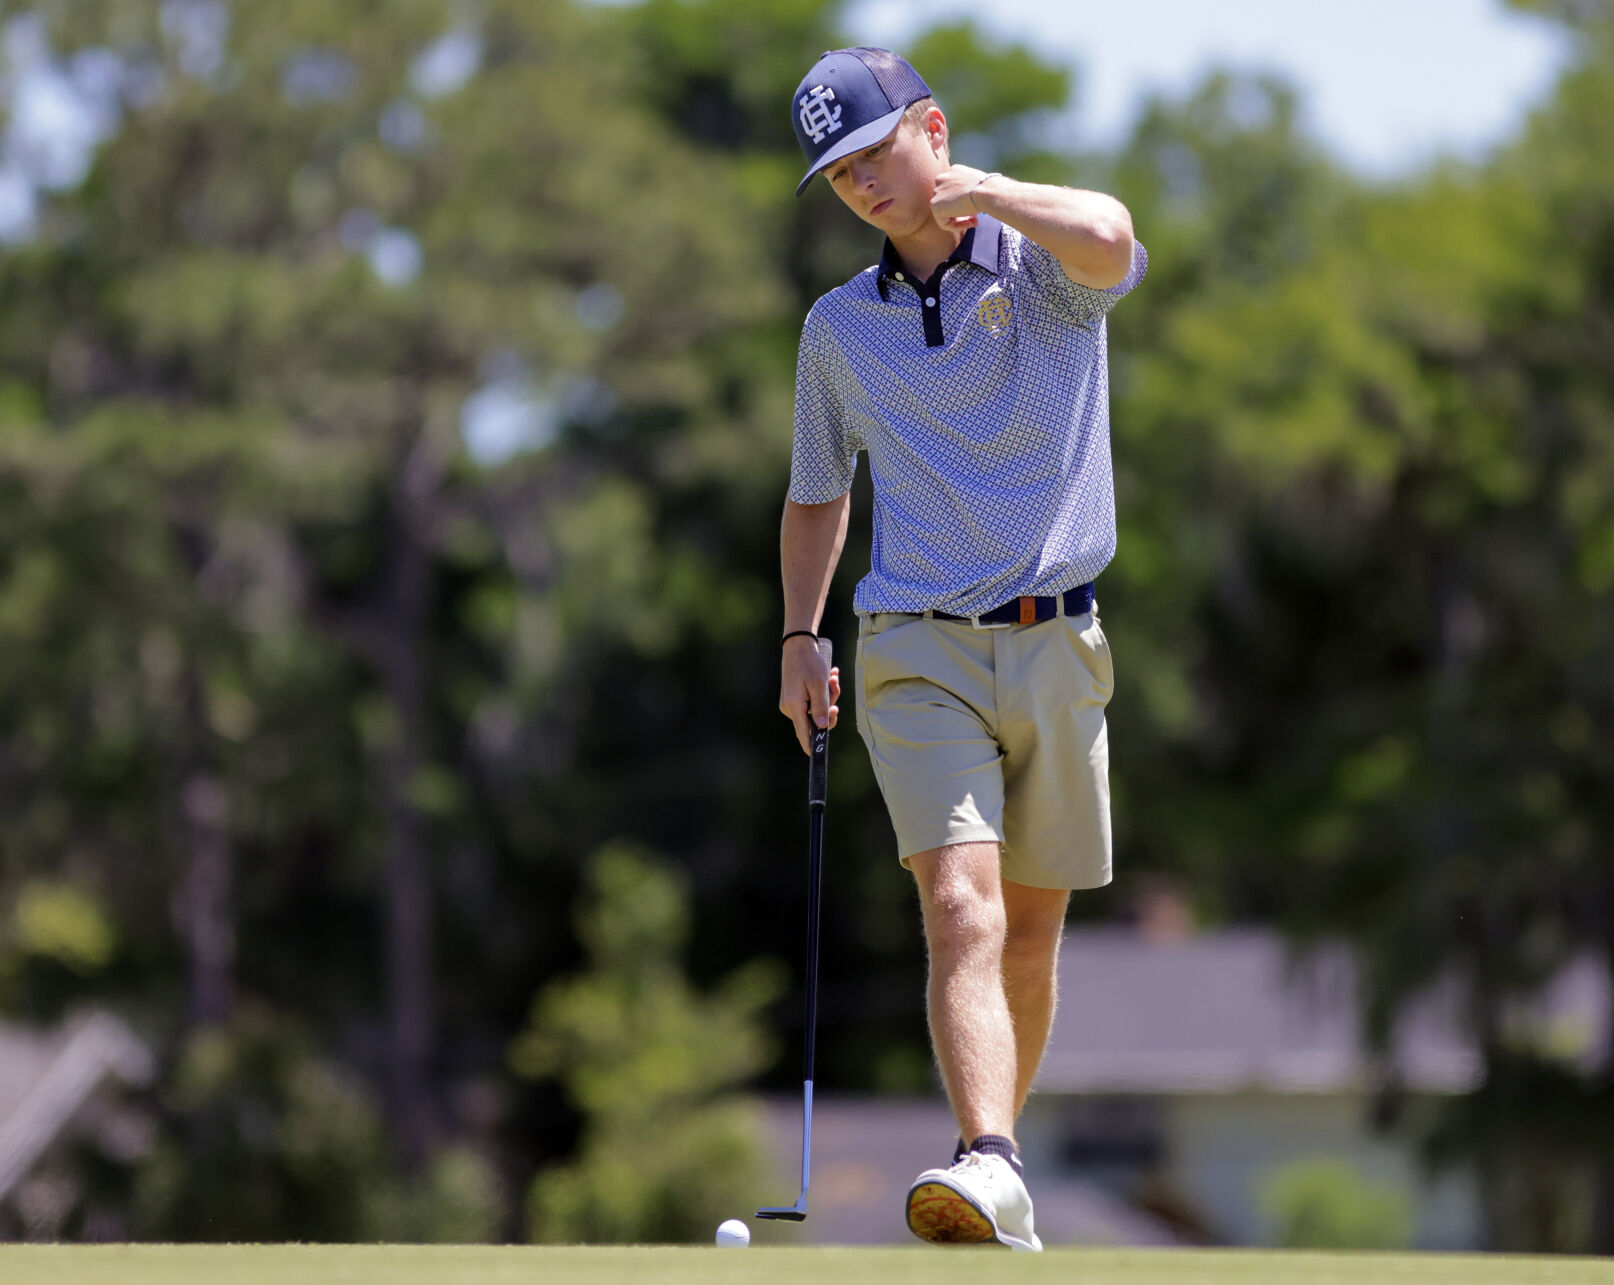 Some golfers at LHSAA state championships will attempt to play 36 holes in one day